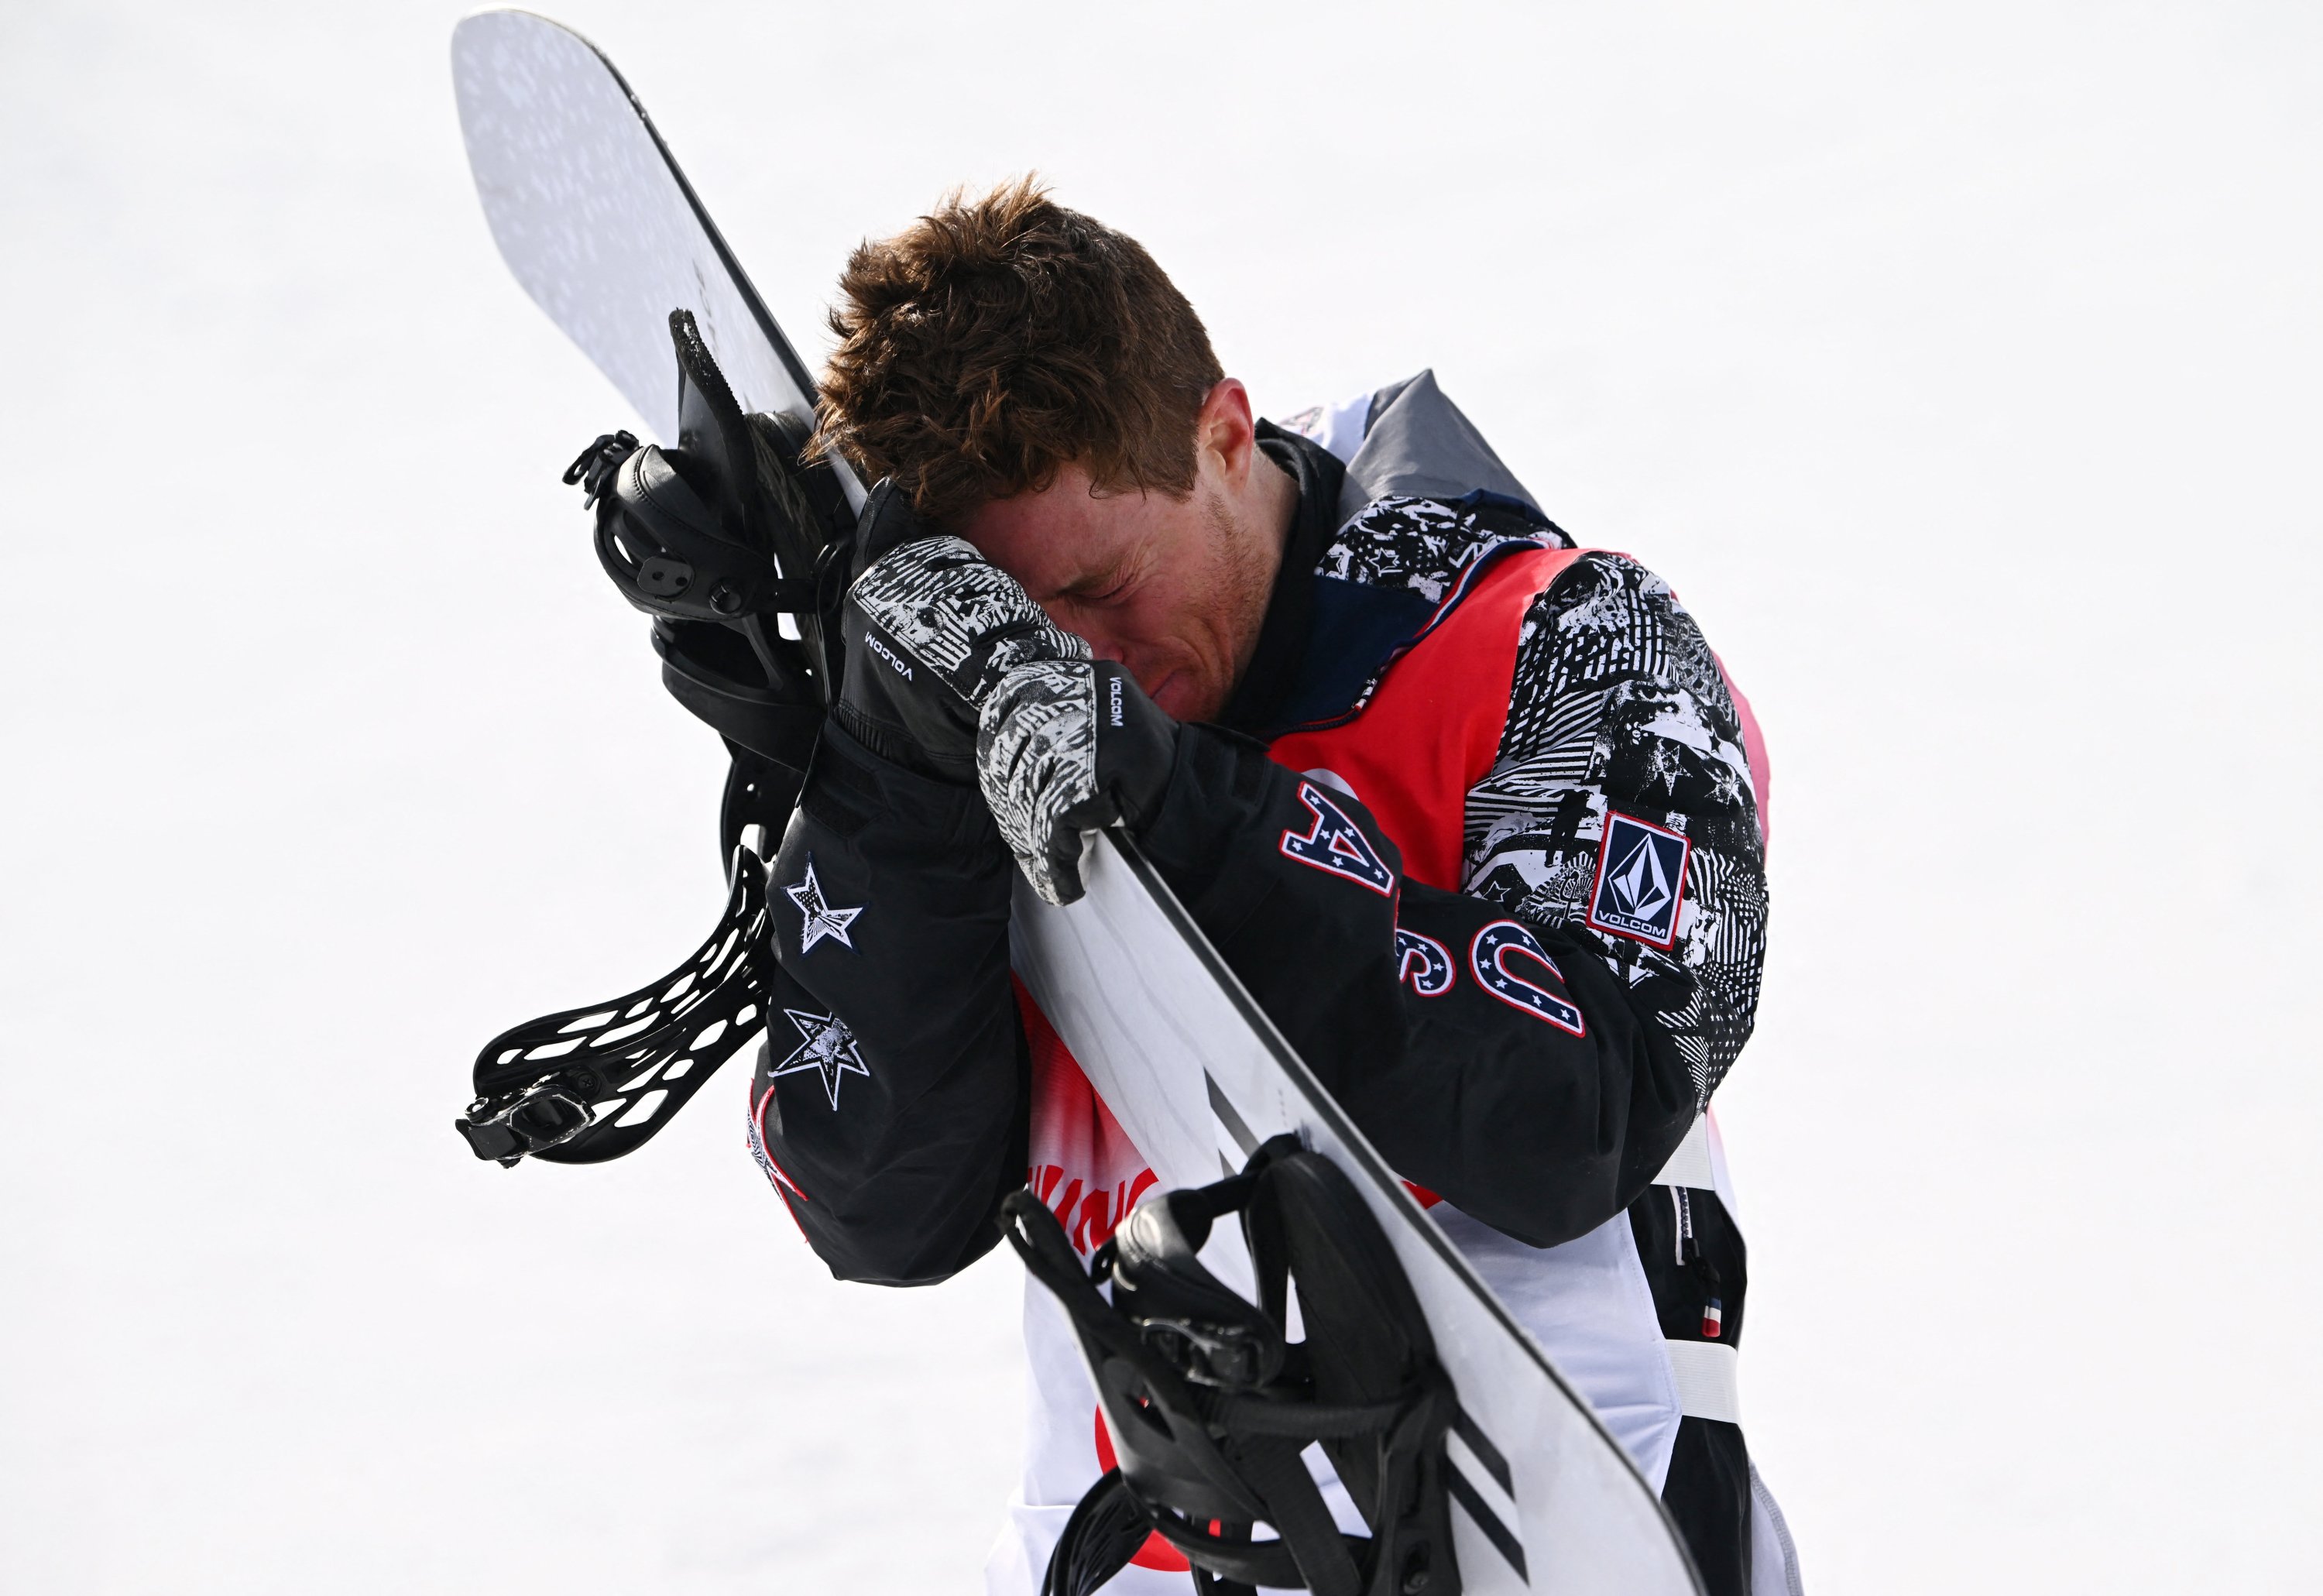 Shaun White reacts as he retires from the sport after competing in the Men's Snowboard Halfpipe final at the Beijing 2022 Olympic Games, in Zhangjiakou, China, Feb. 11, 2022. (Reuters Photo)
